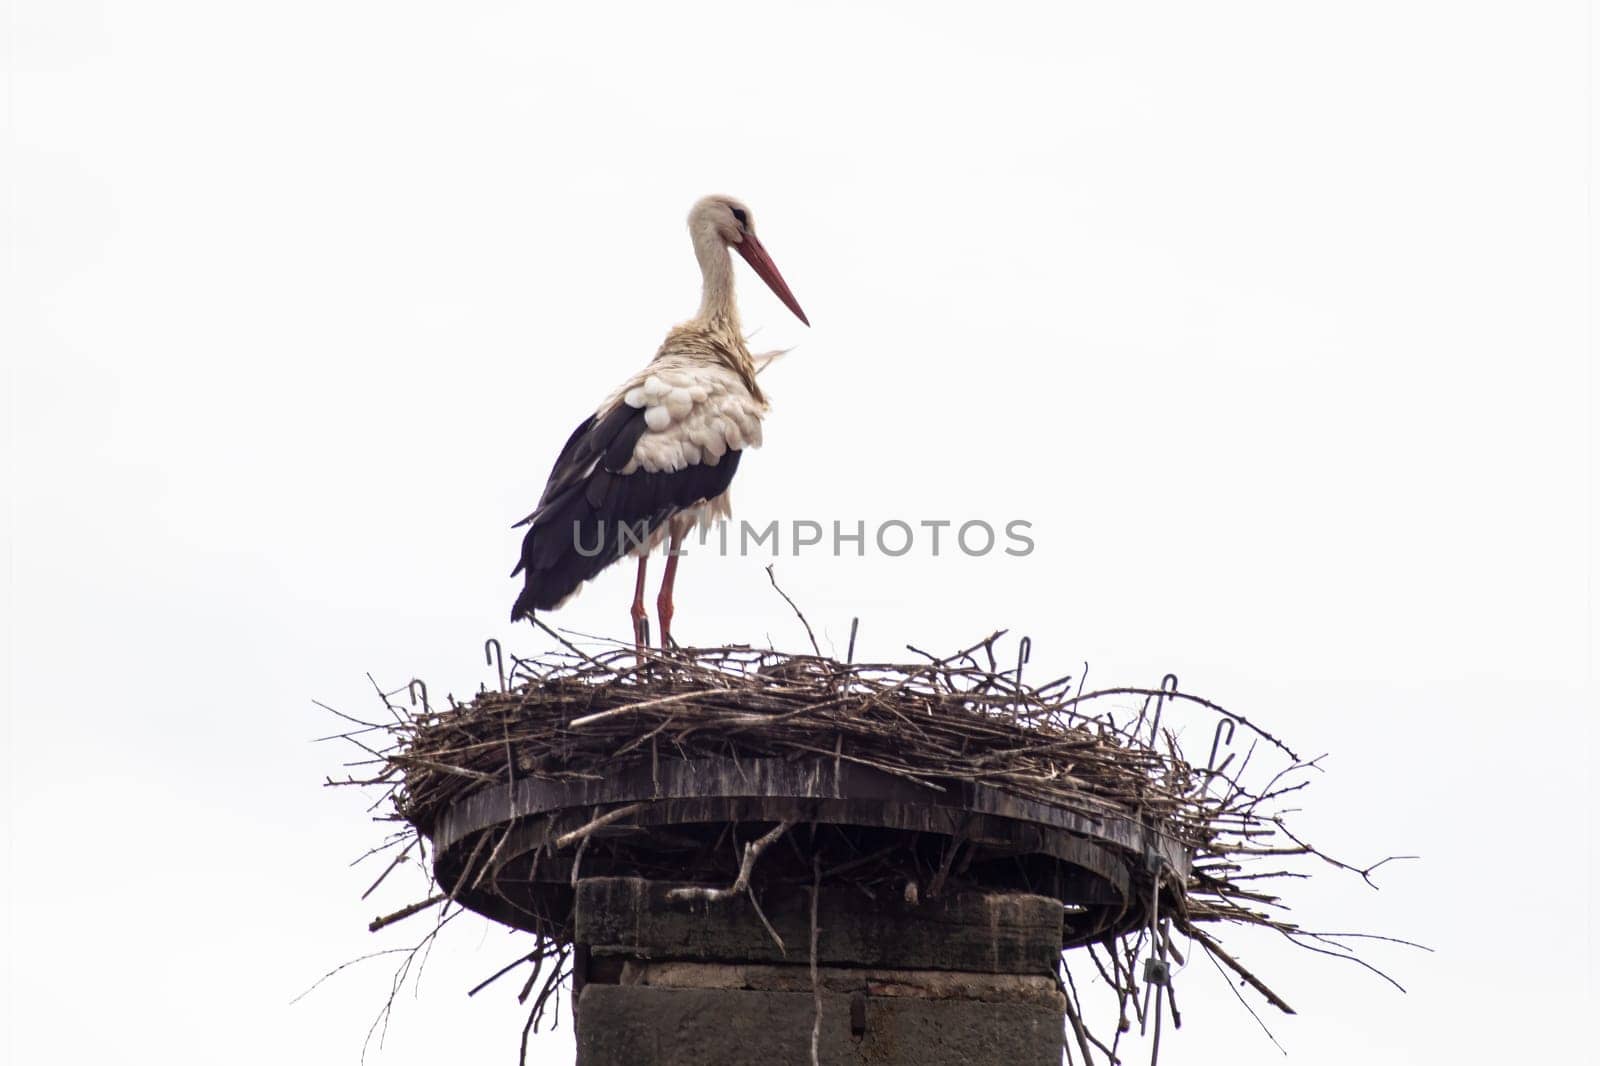 a stork (Ciconia ciconia) stands in its nest and looks over the landscape